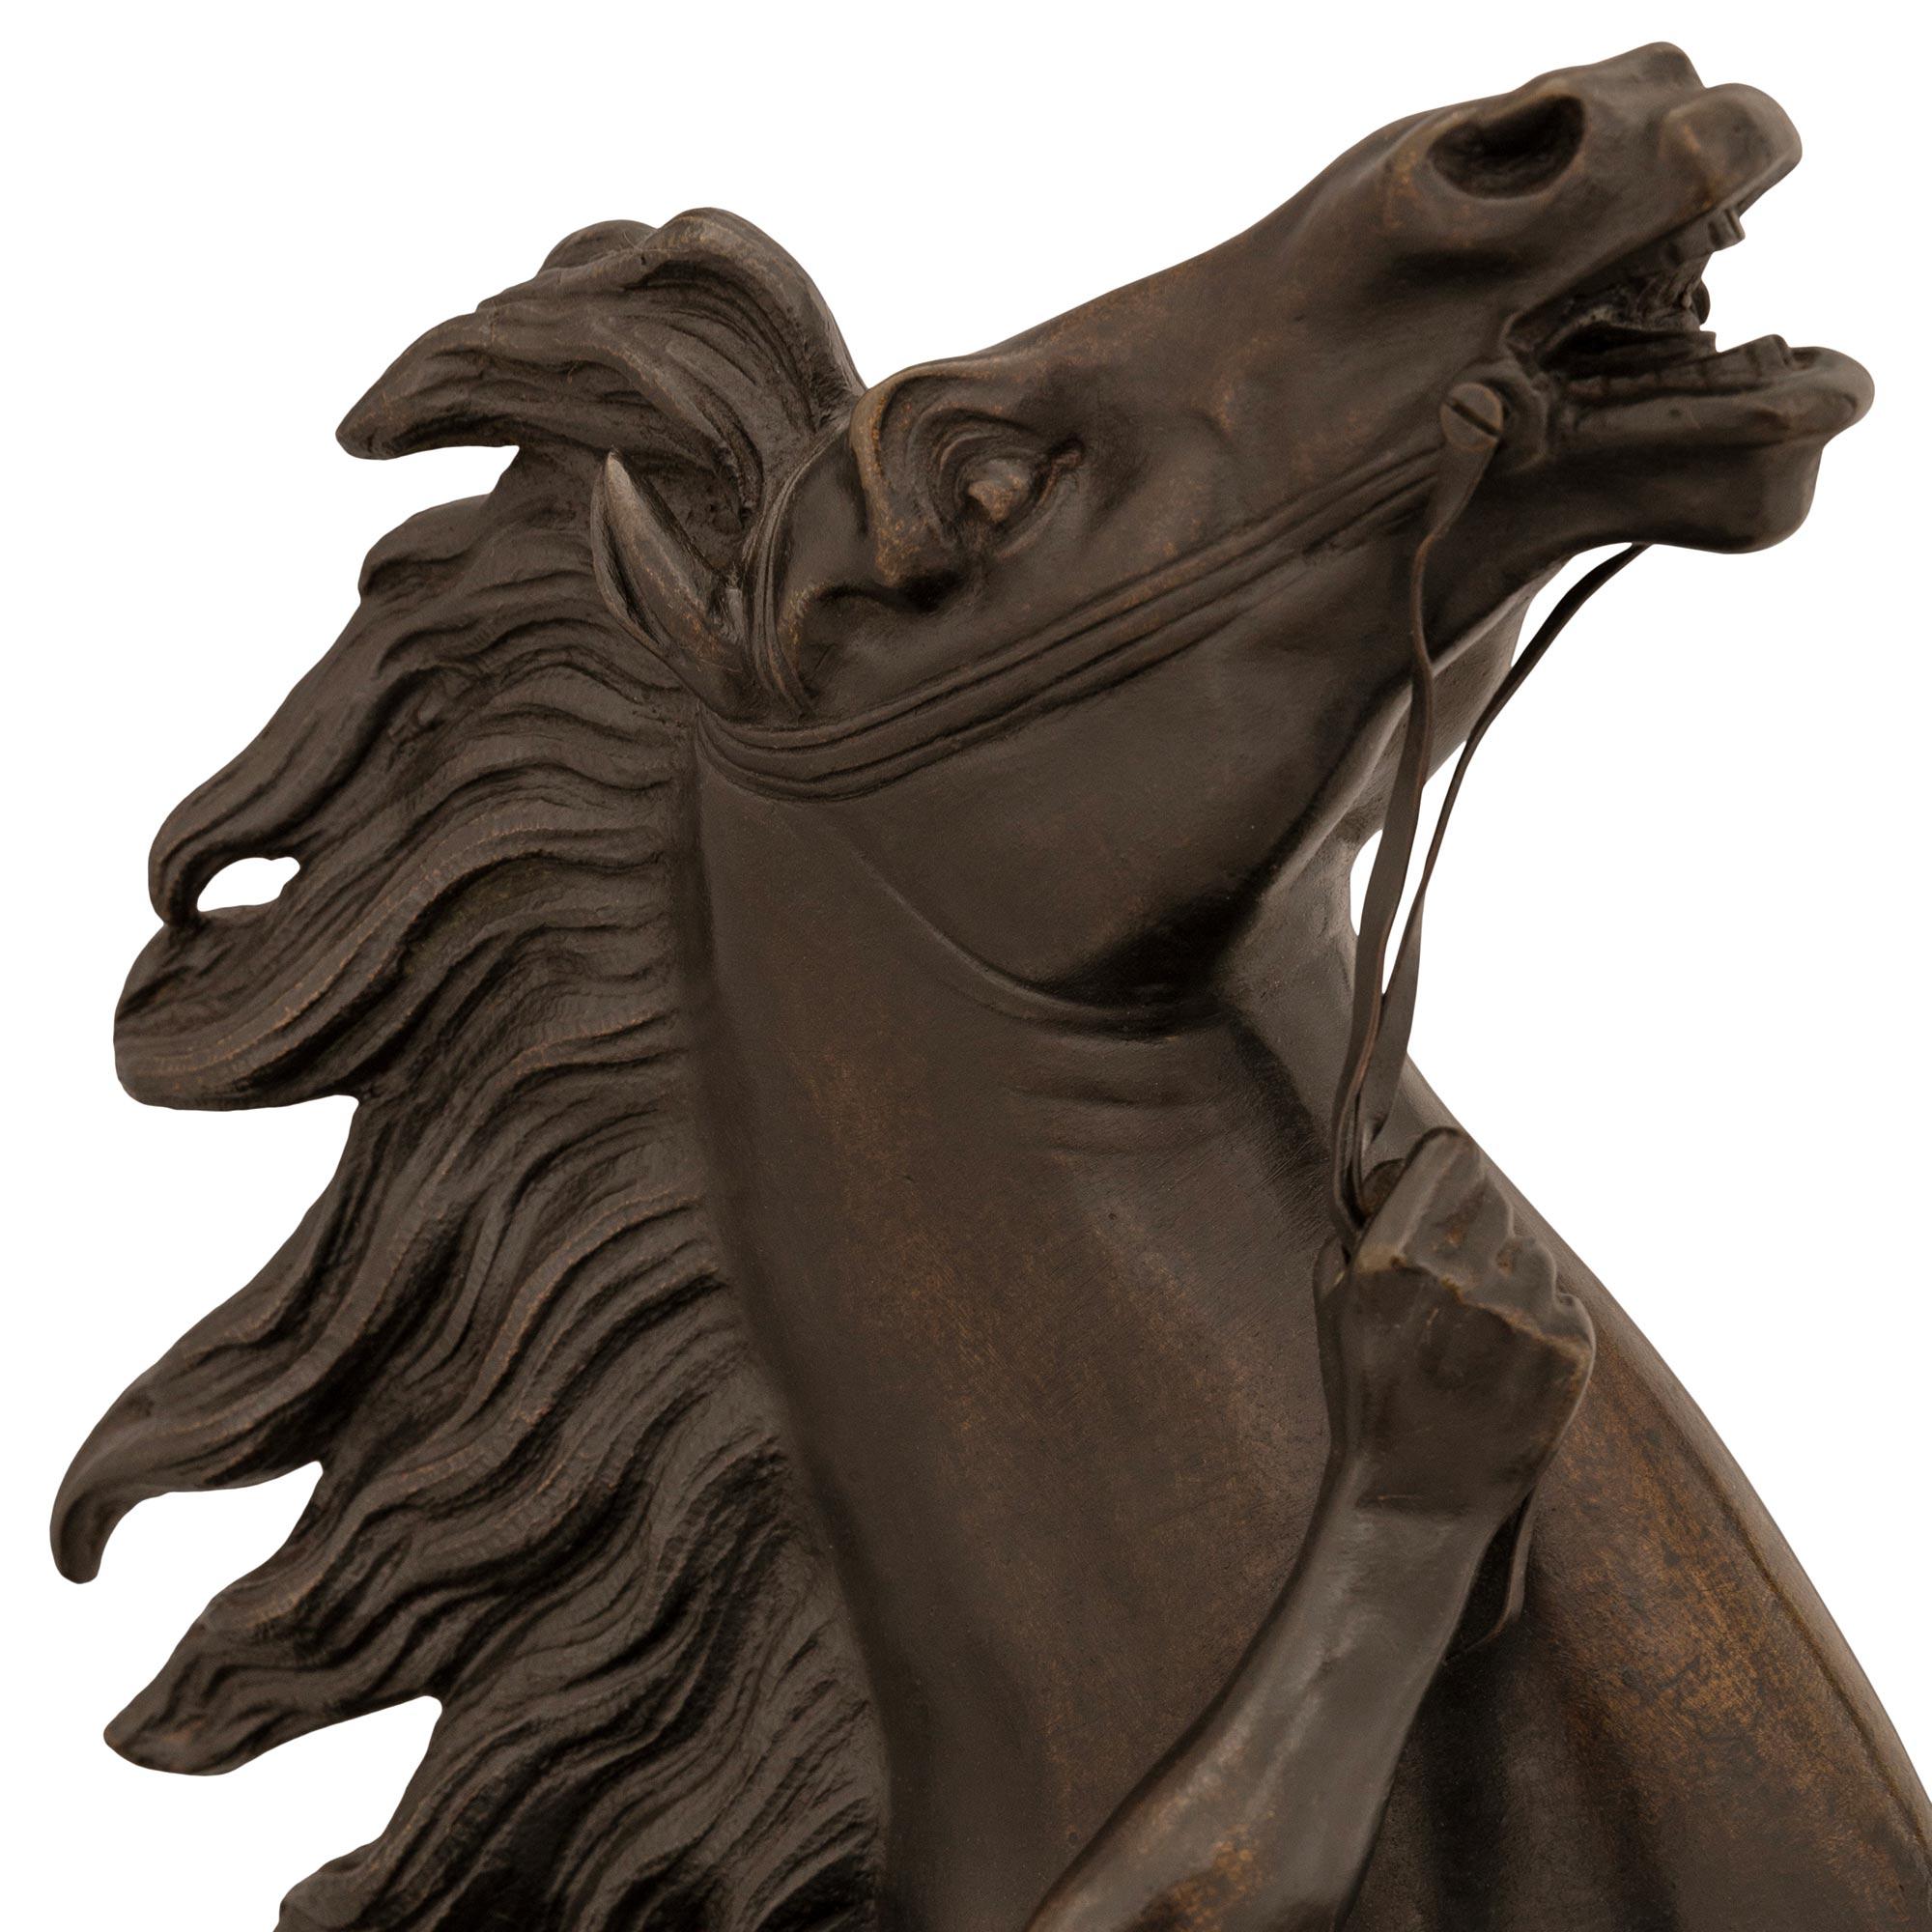 A handsome French 19th century patinated Bronze statue of a horse and groom, modeled after the horses of Marly. The excited horse is rearing up with its front legs off the ground, its mane blowing in the wind, and an animal skin draped over its